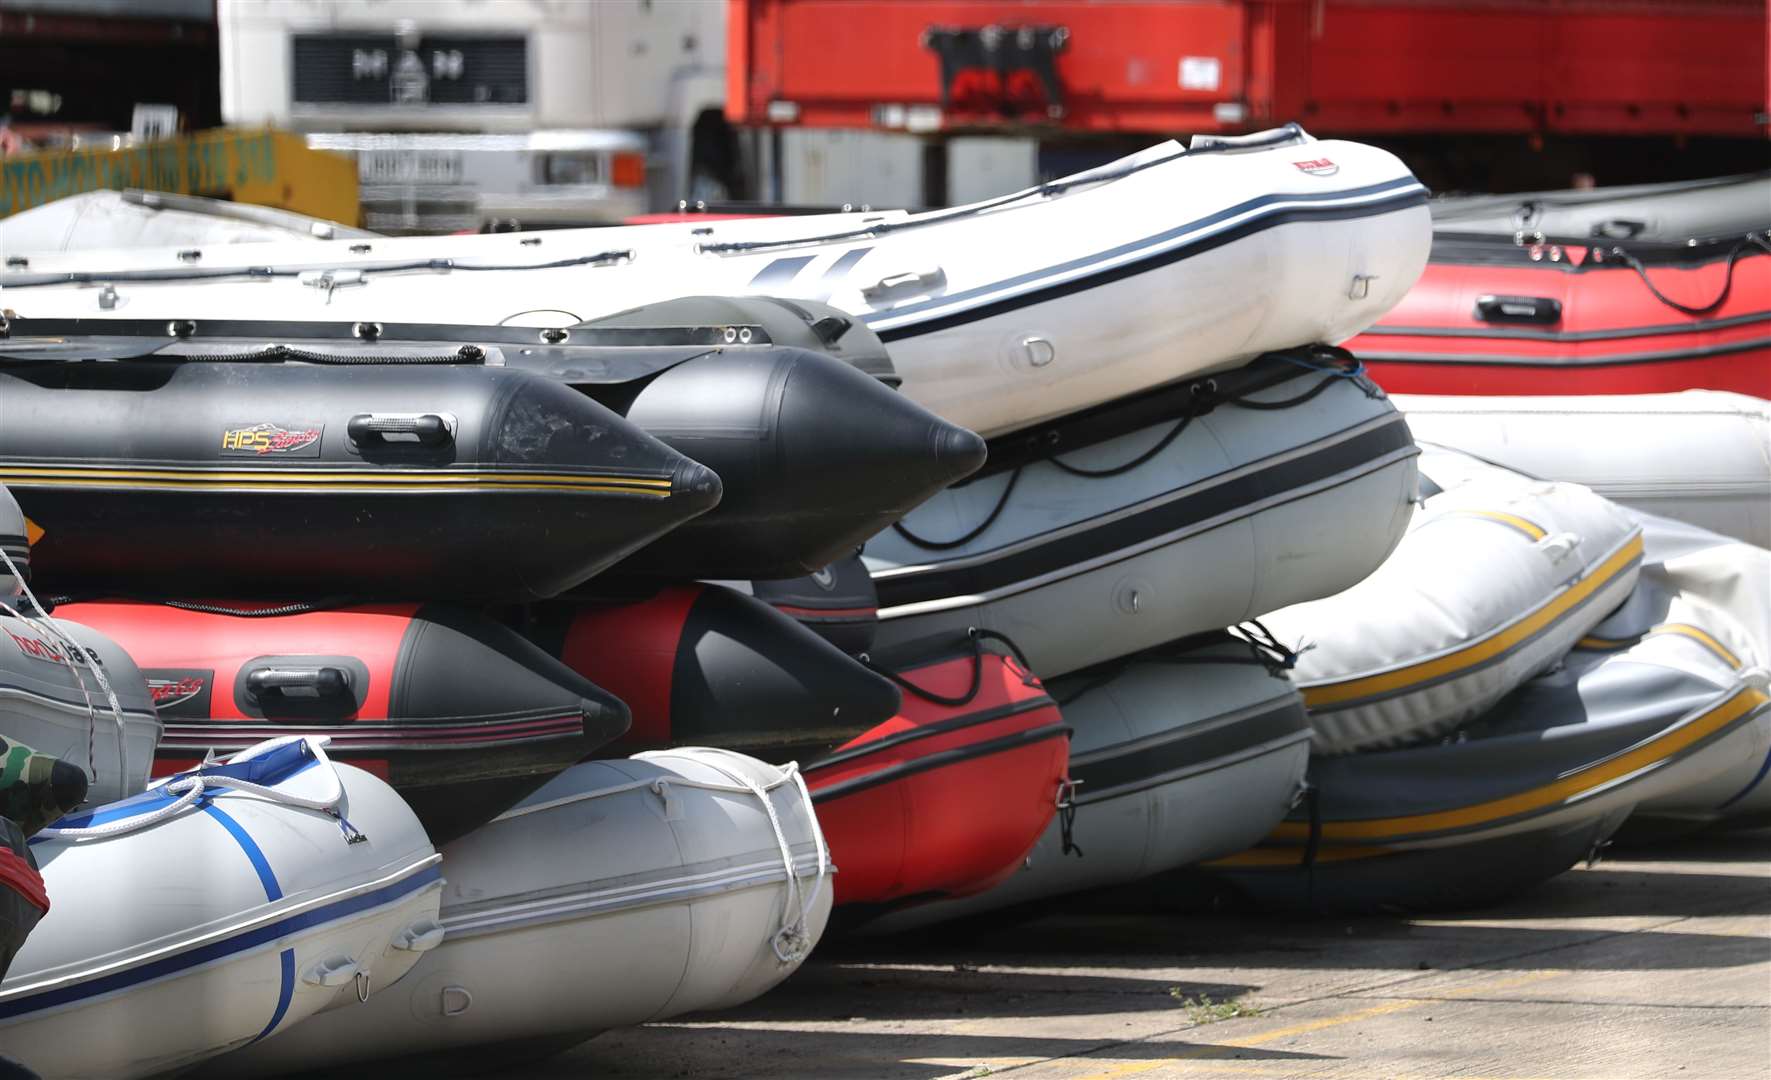 Boats in a secure compound in Dover which have been seized after being intercepted in the Channel while carrying migrants from the French coast to England